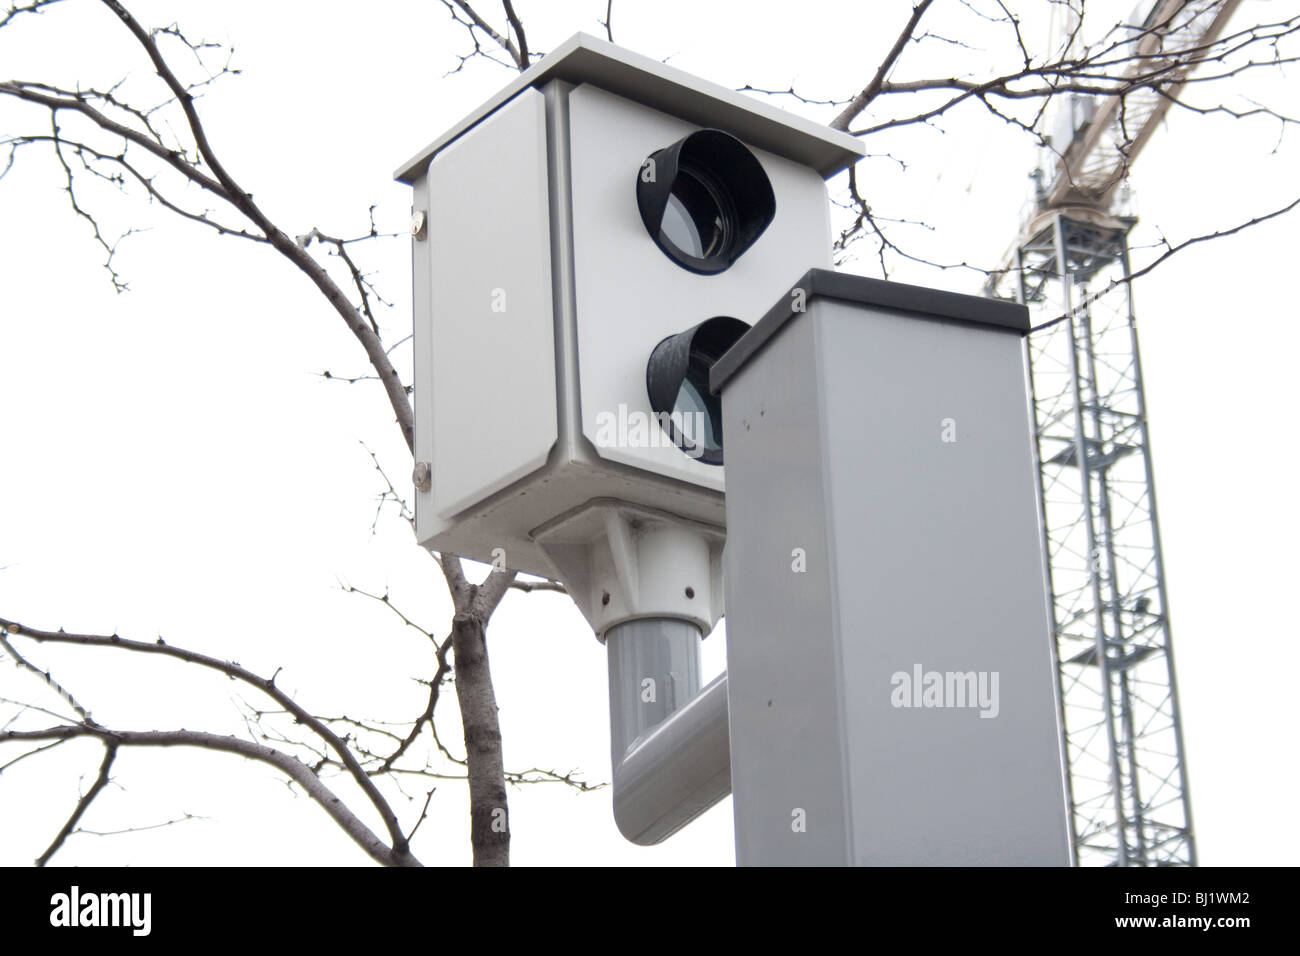 red light camera catch traffic law offender Stock Photo